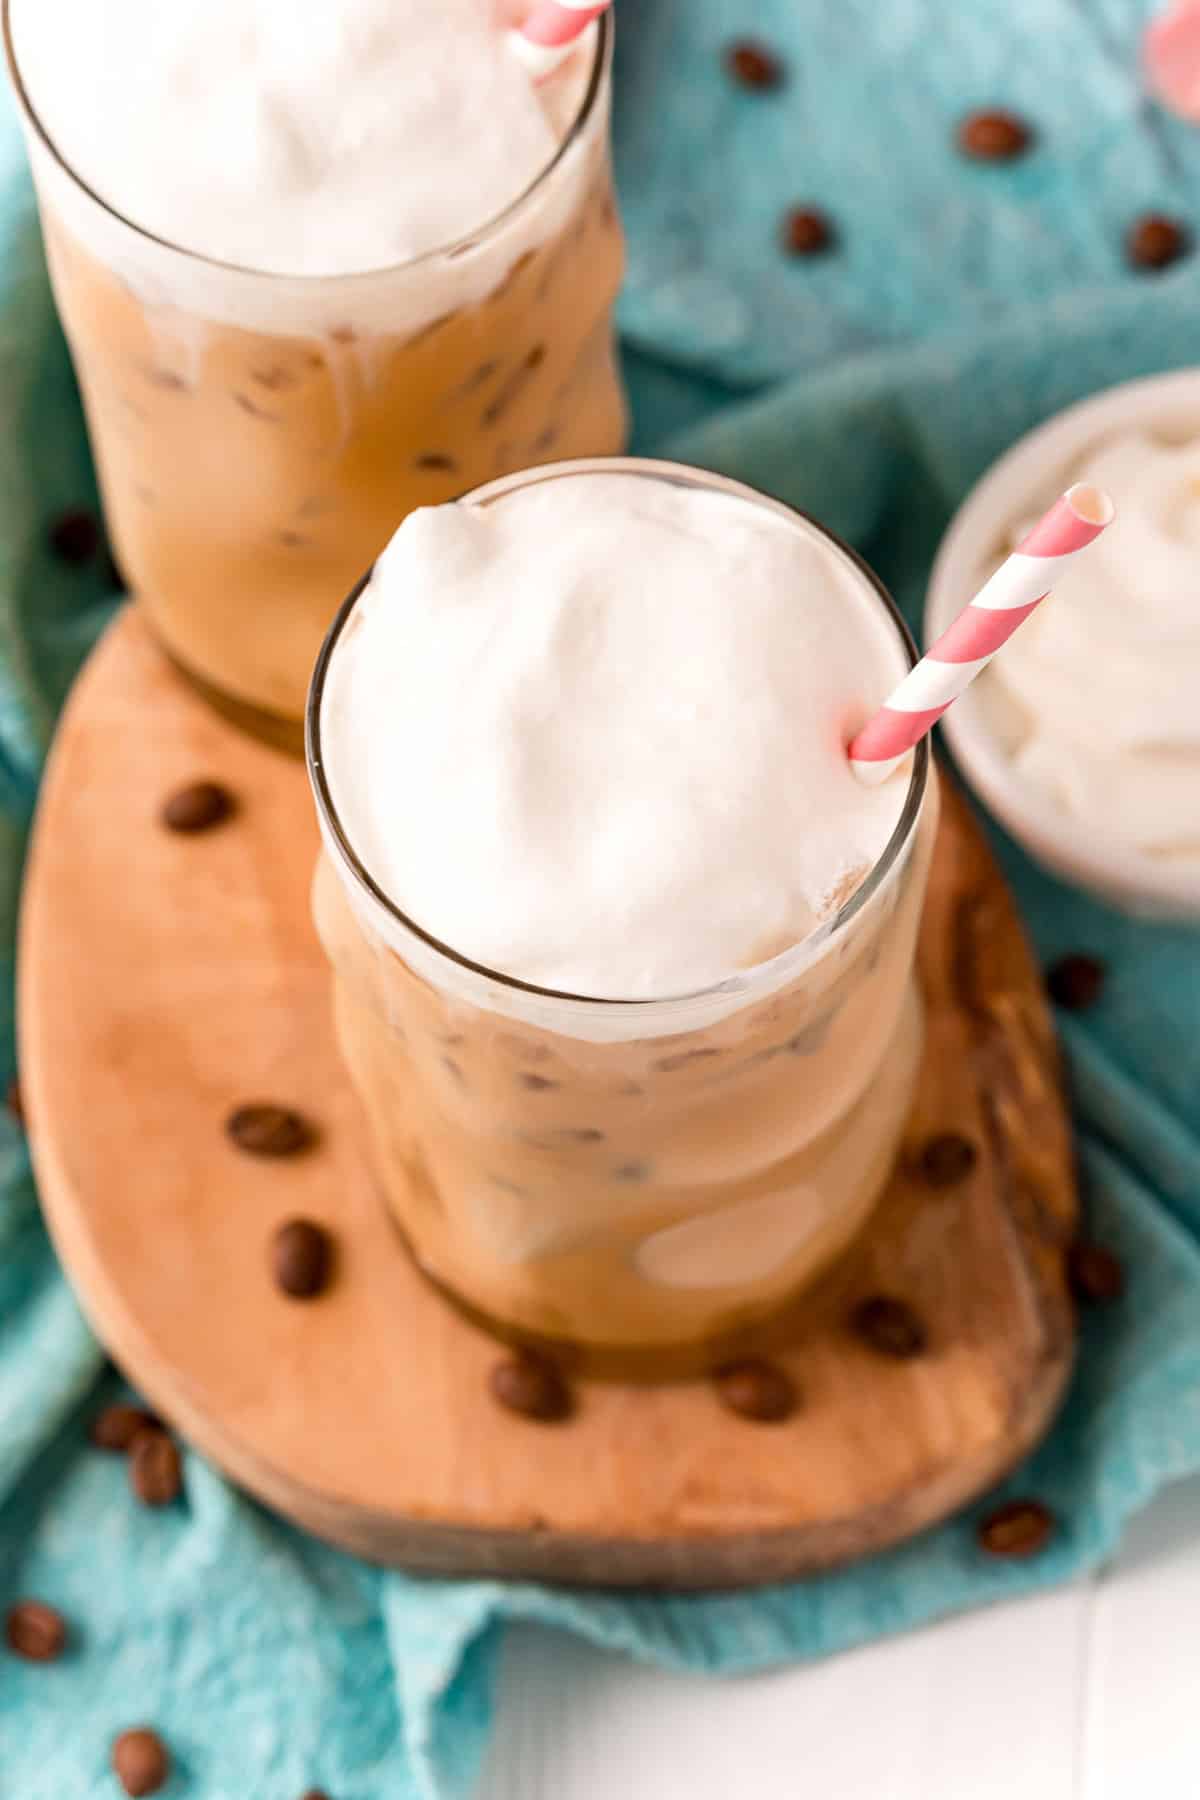 Overhead view of a whipped cream topped iced coffee.